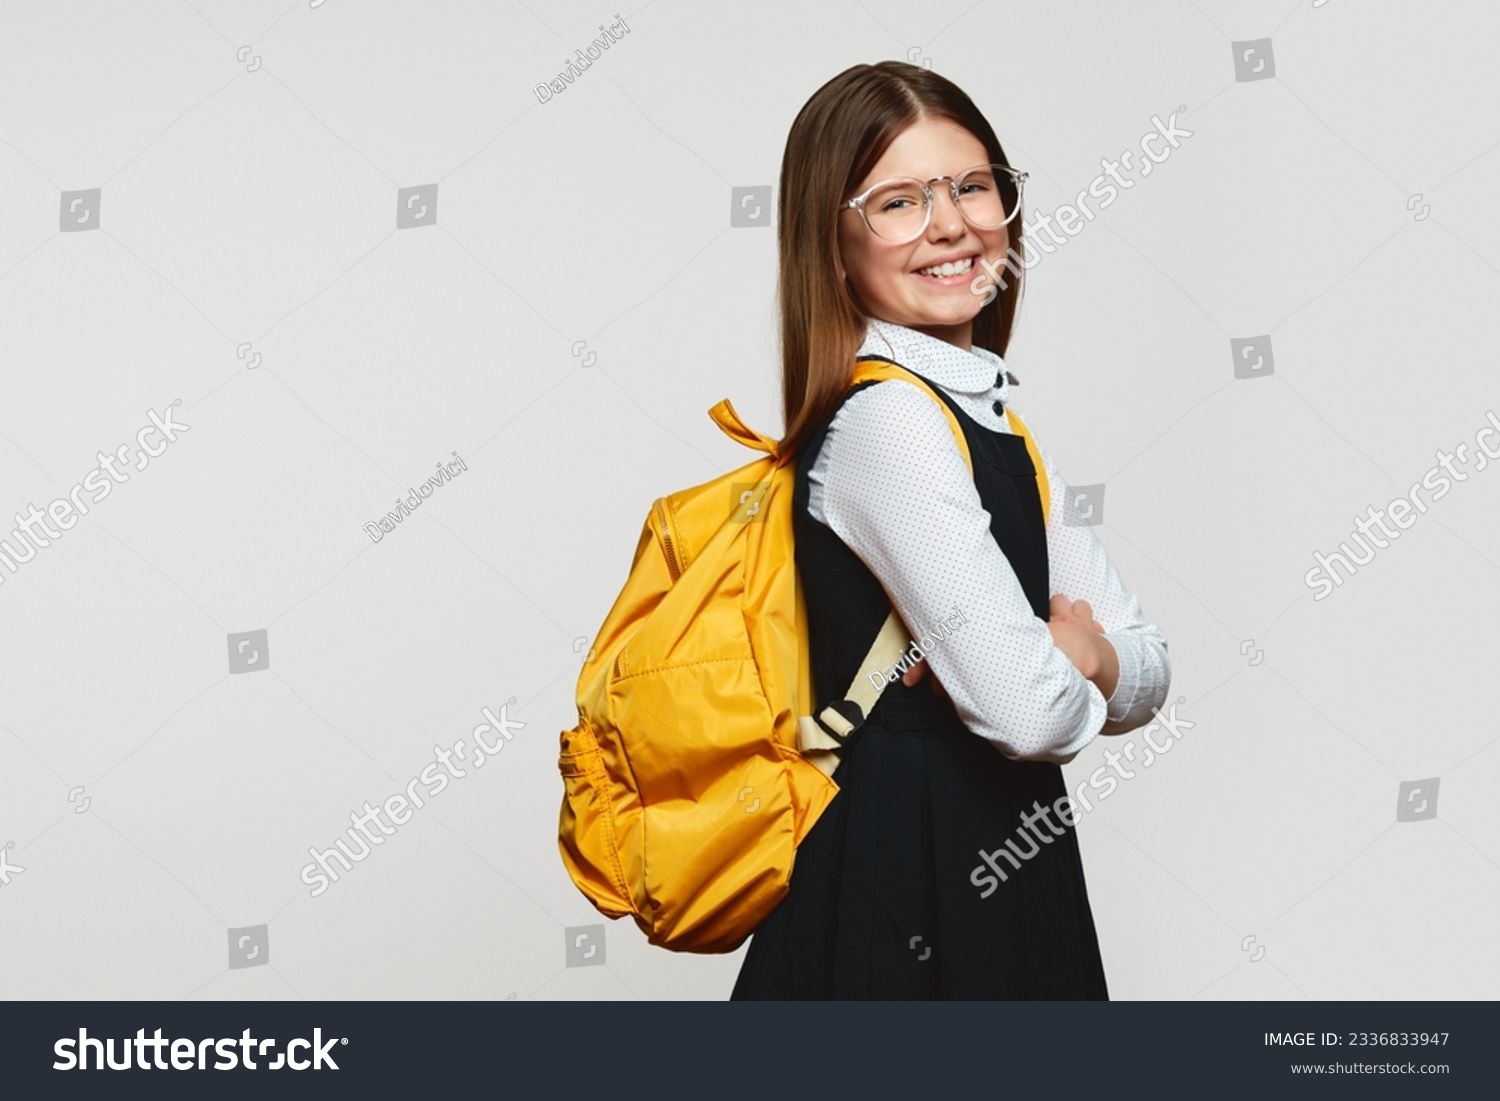 Side view of happy schoolgirl wearing glasses and yellow backpack holding crossed hands while smiling against white backdrop with free space for text #2336833947